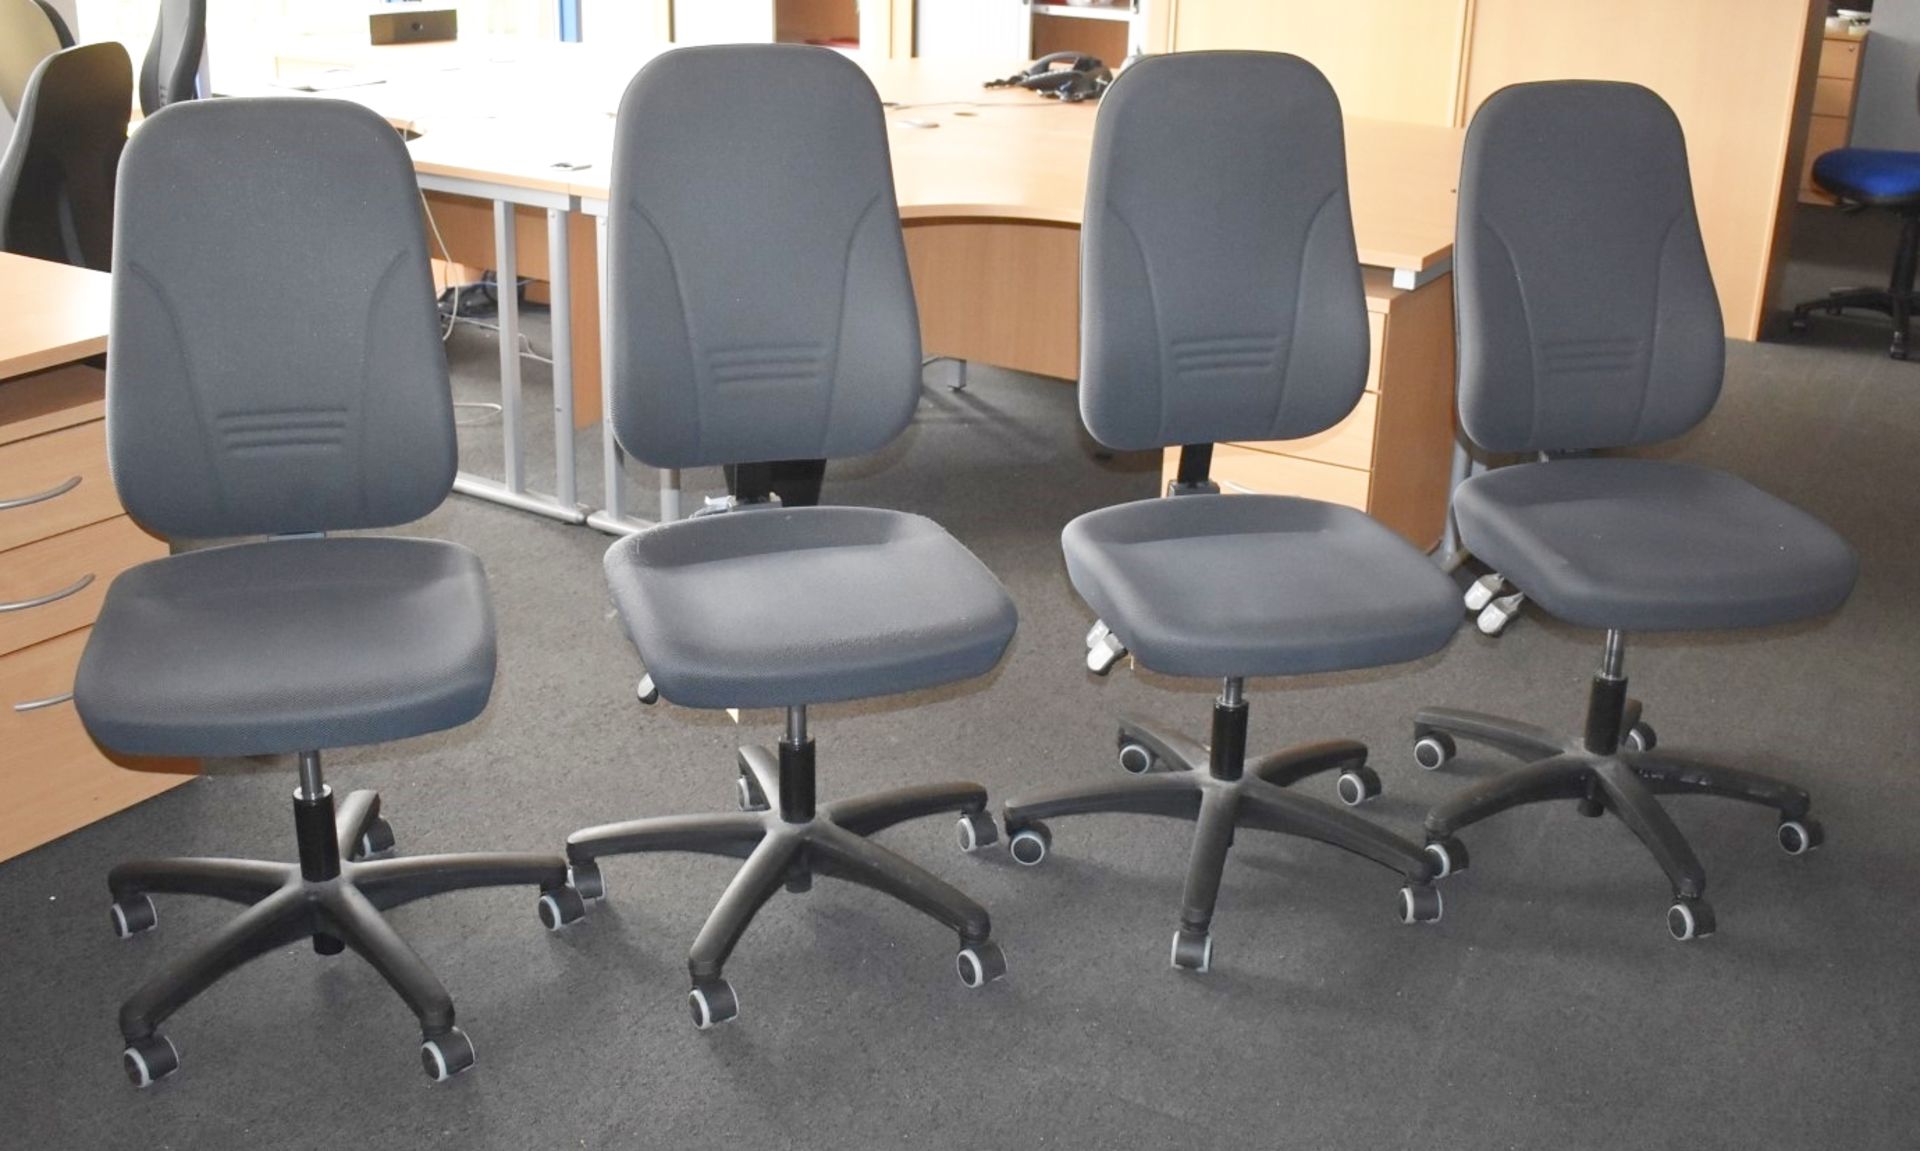 4 x Ergonomical Office Chairs in Grey - Gas Lift Height Adjustable - CL529 - Location: Wakefield